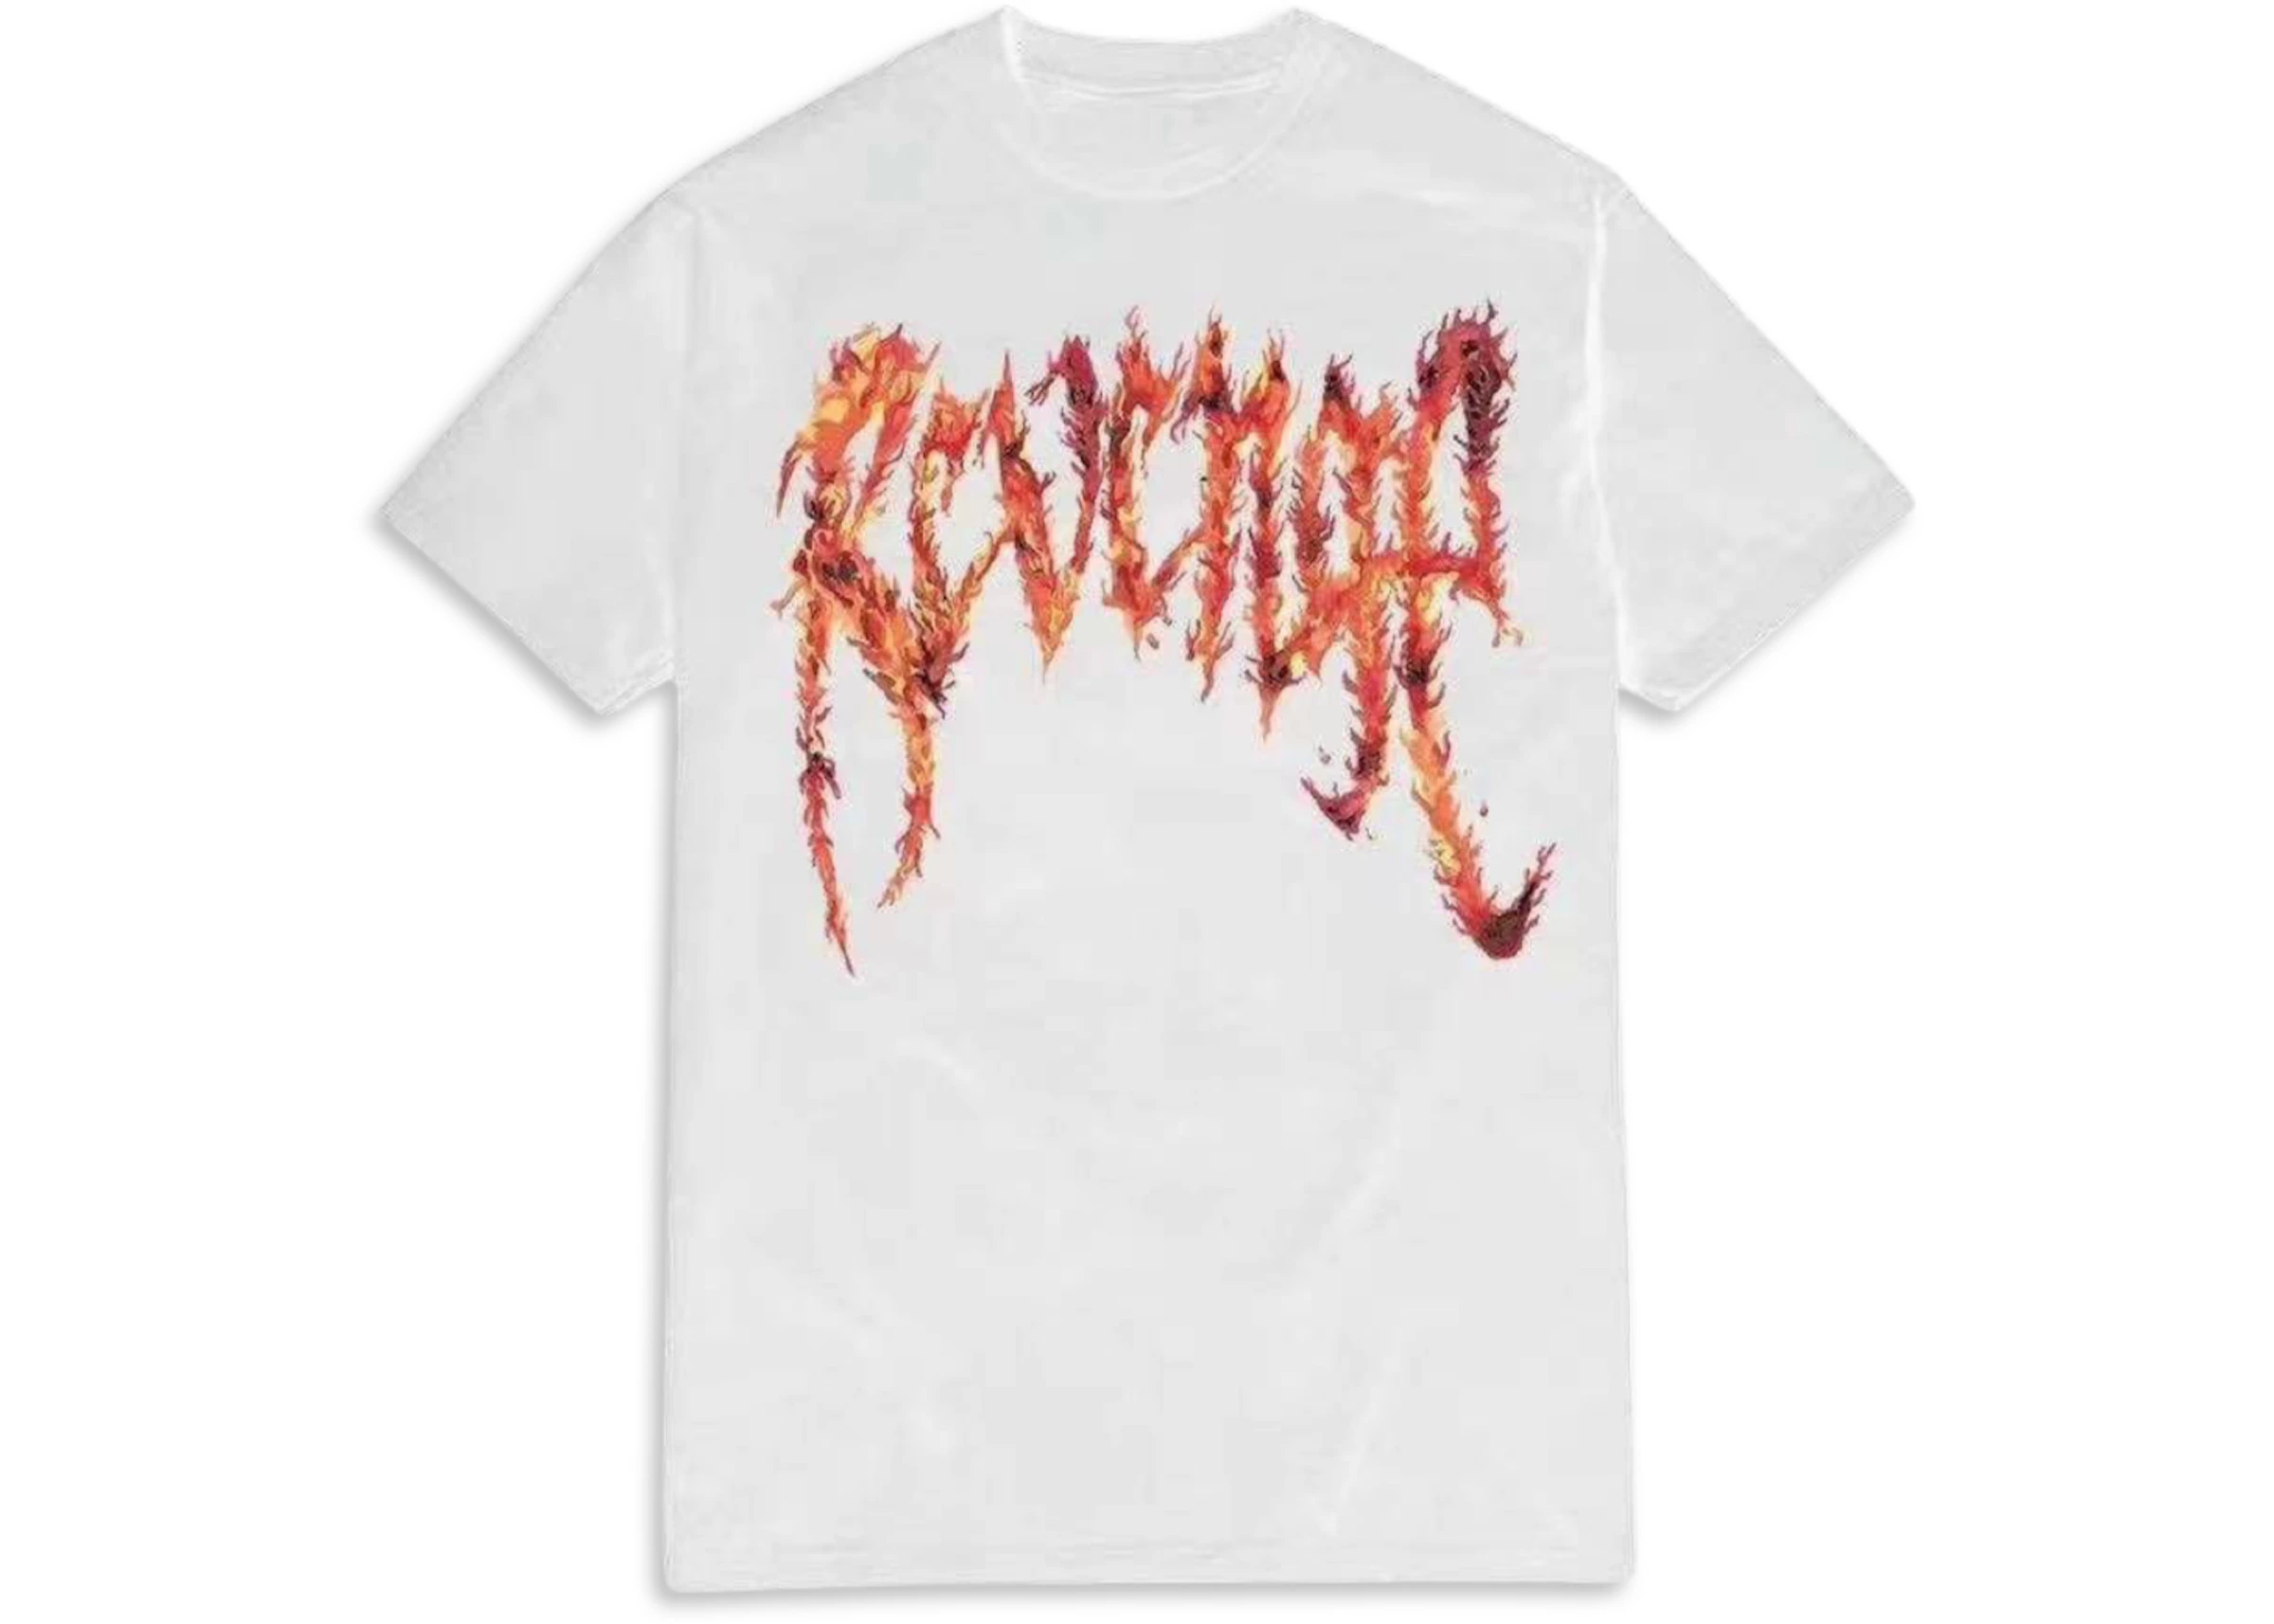 Fate Proud smear Revenge Inferno T-shirt White/Red - US